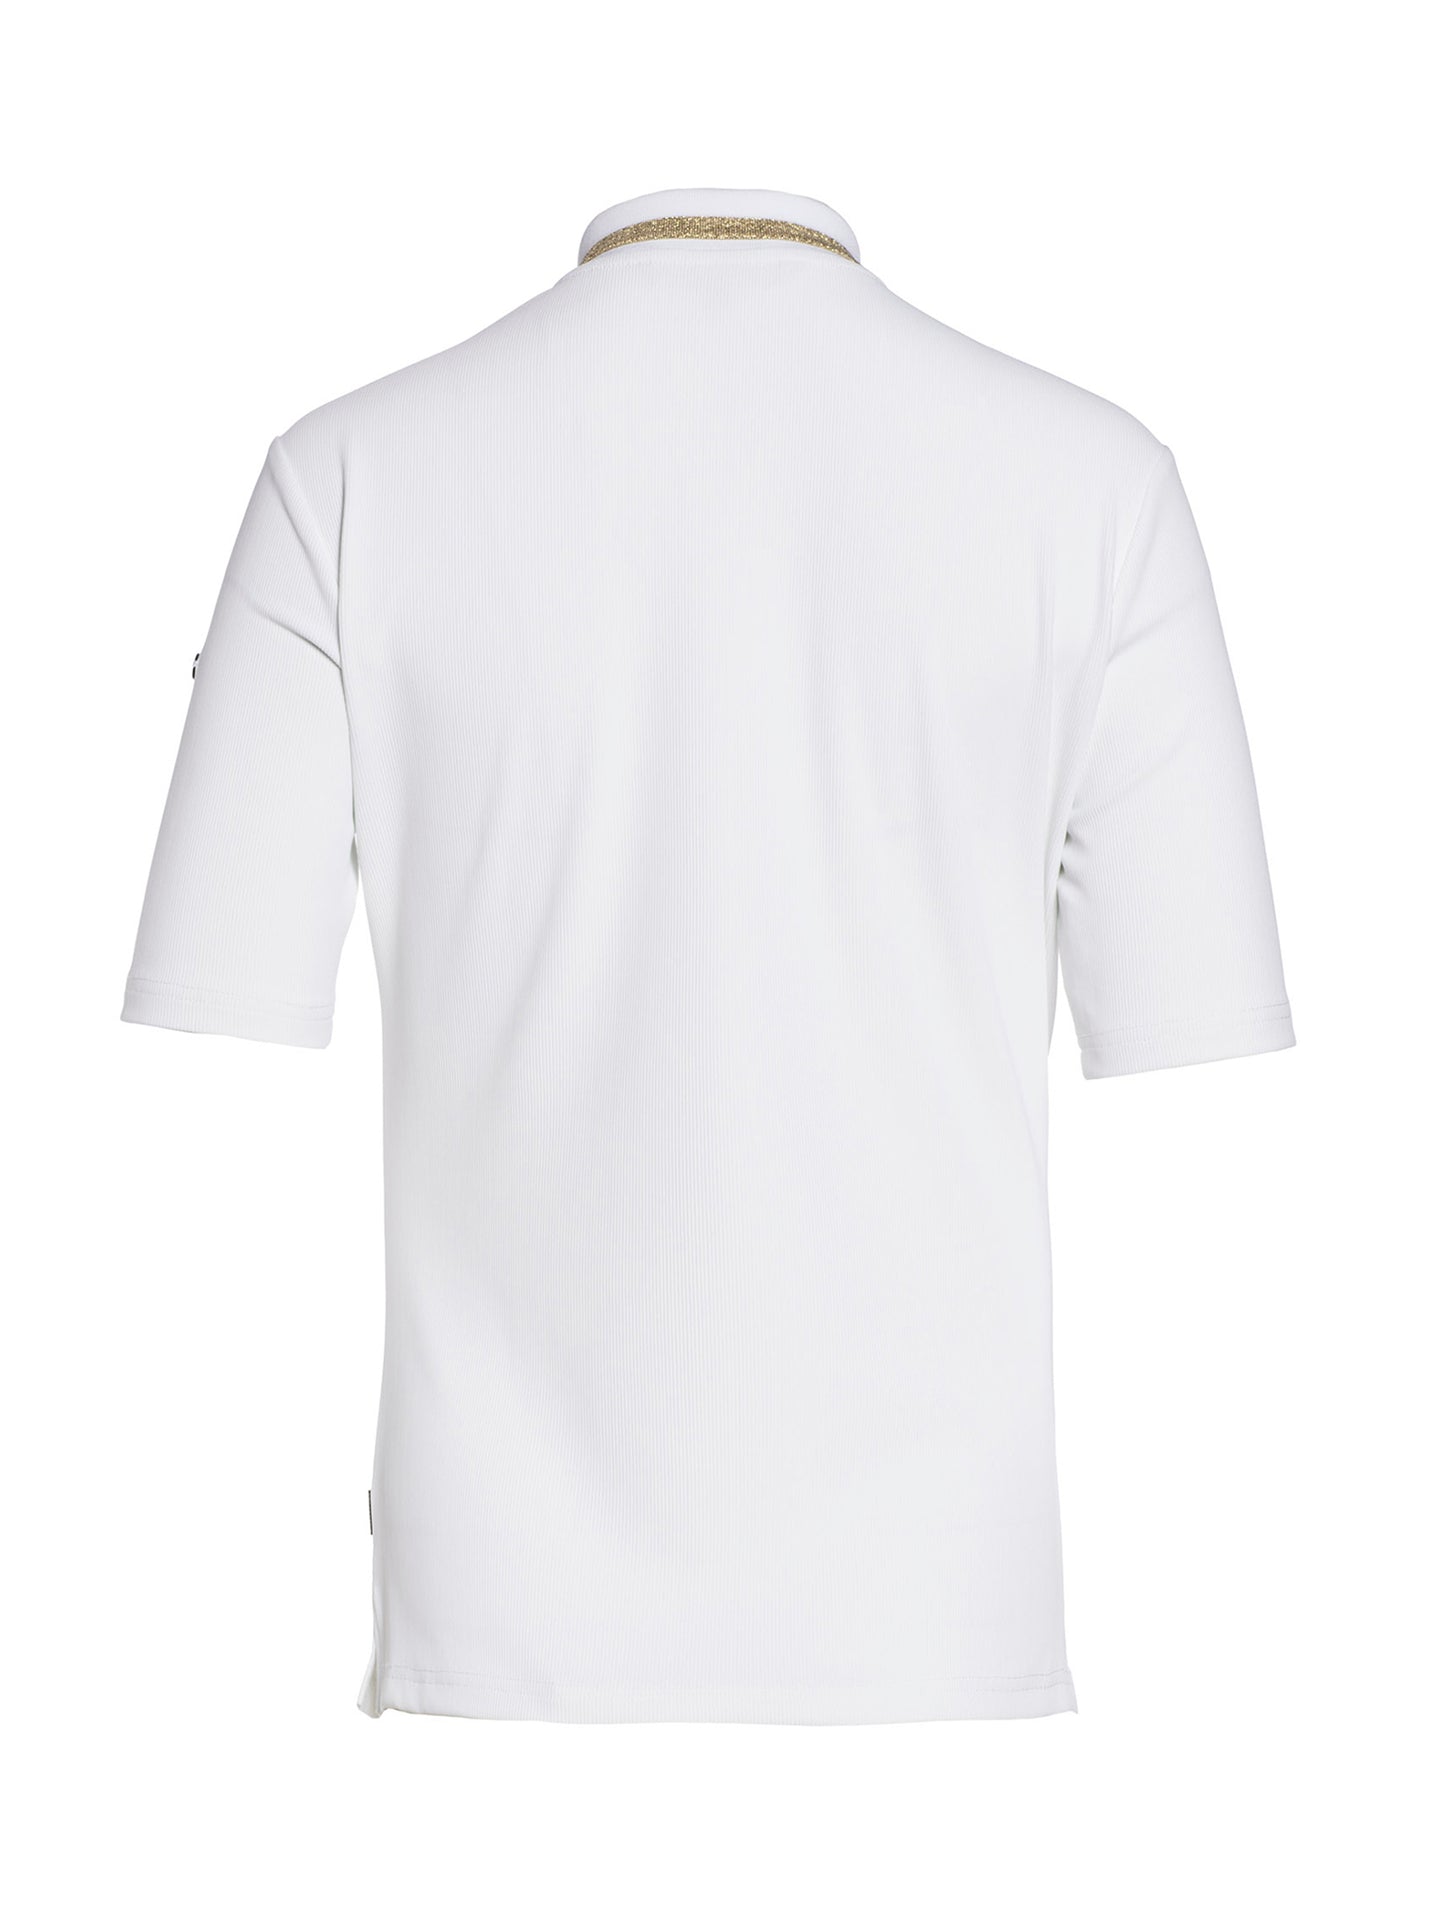 CASSIA short sleeve top white